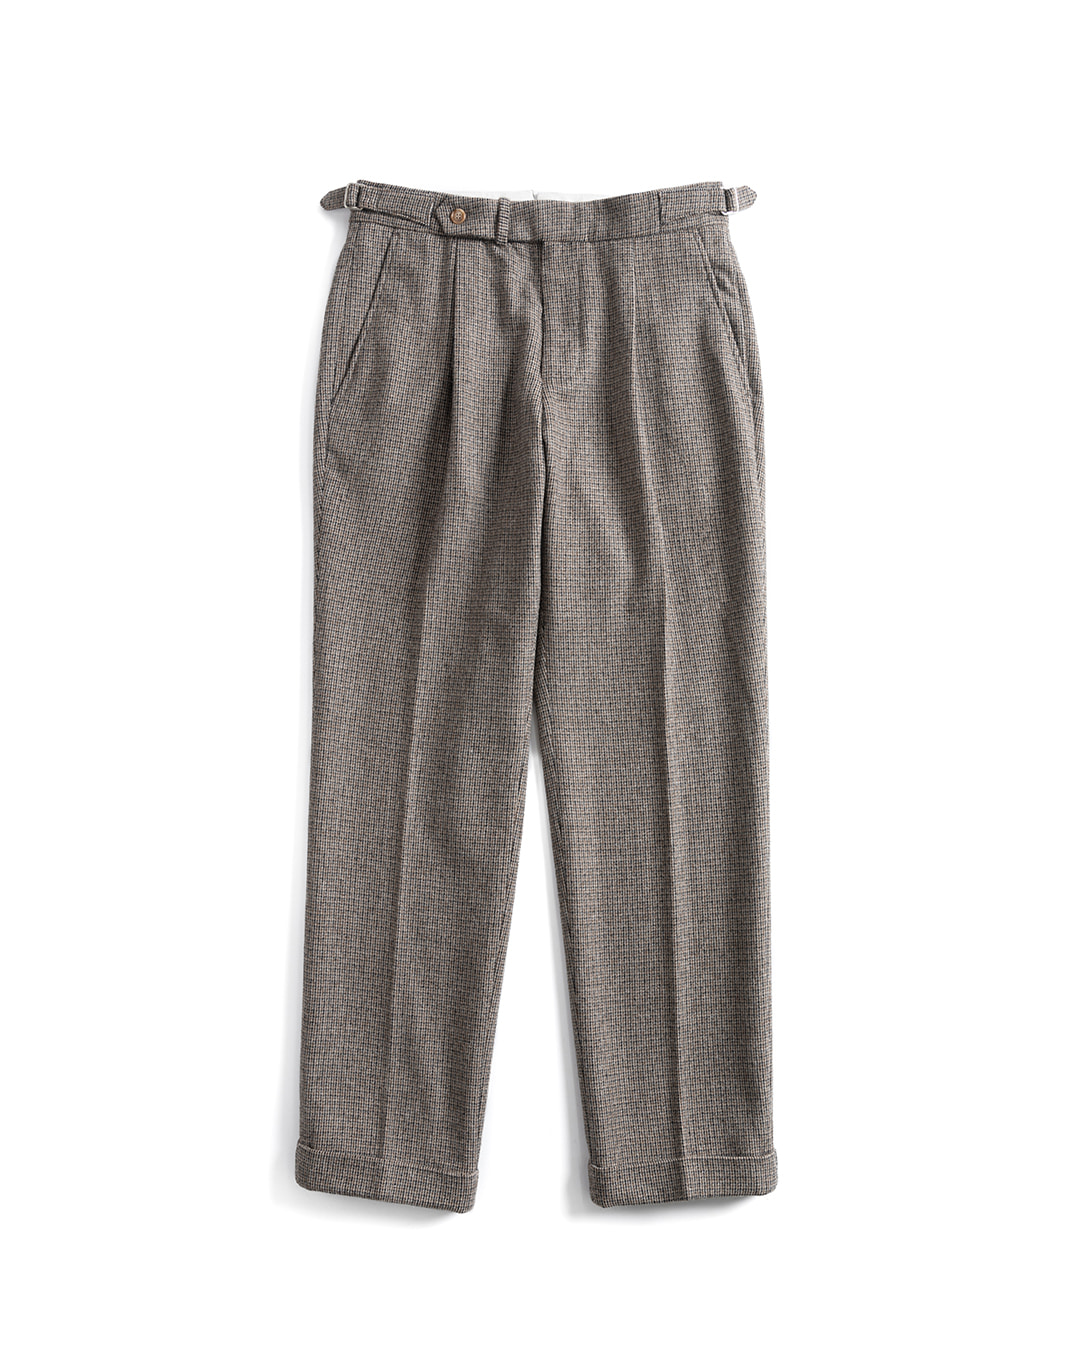 08 TAILORED FIT TROUSERS (beige)